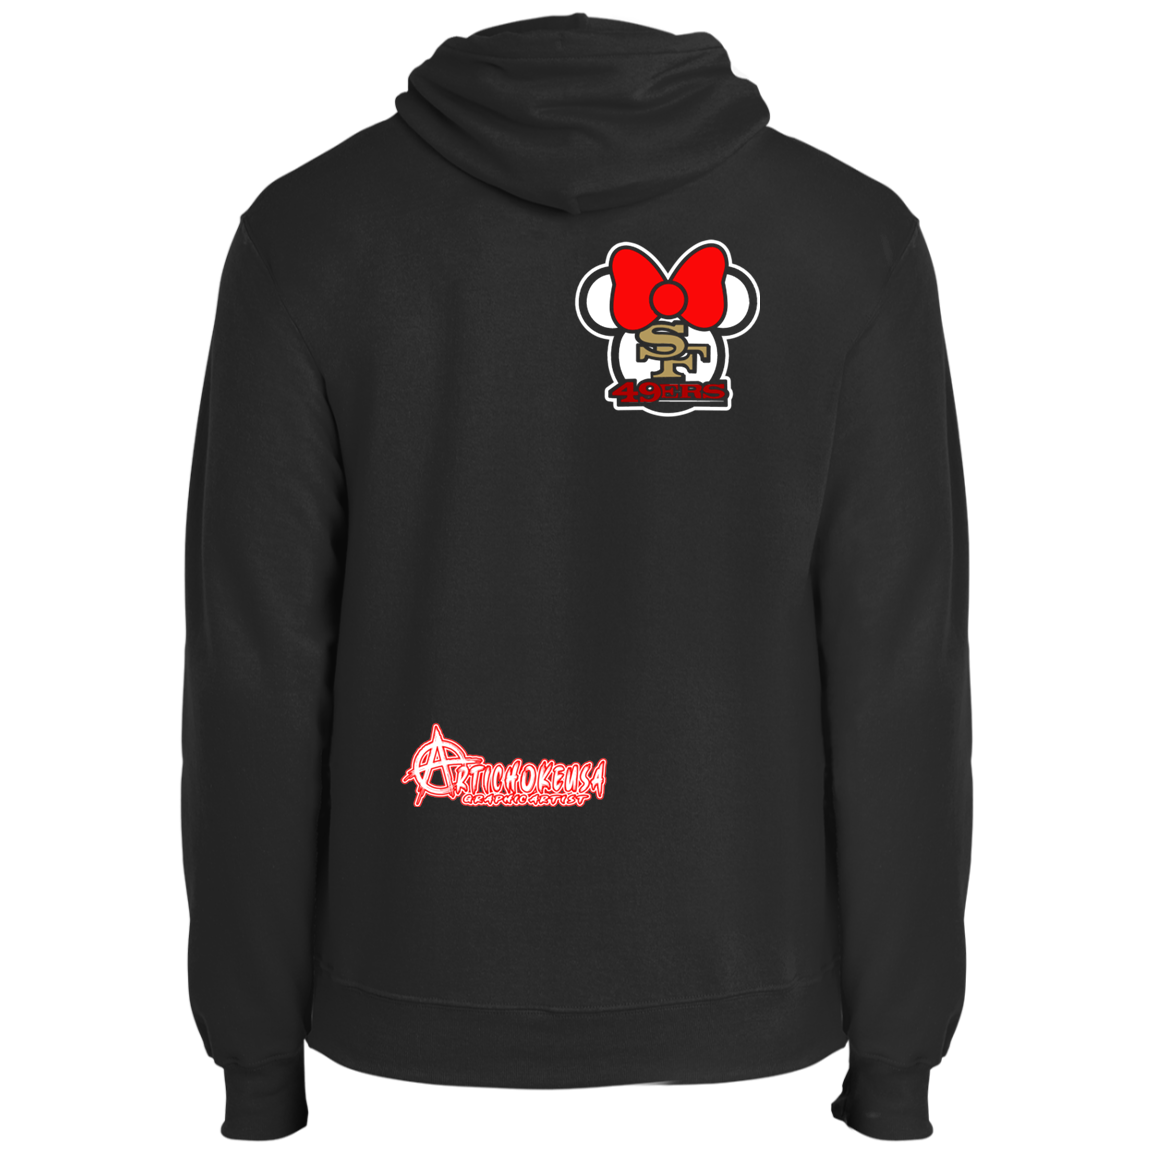 ArtichokeUSA Custom Design #51. These are a few of my favorite things. SF 49ers/Hello Kitty/Mickey Mouse Fan Art. Fleece Pullover Hoodie